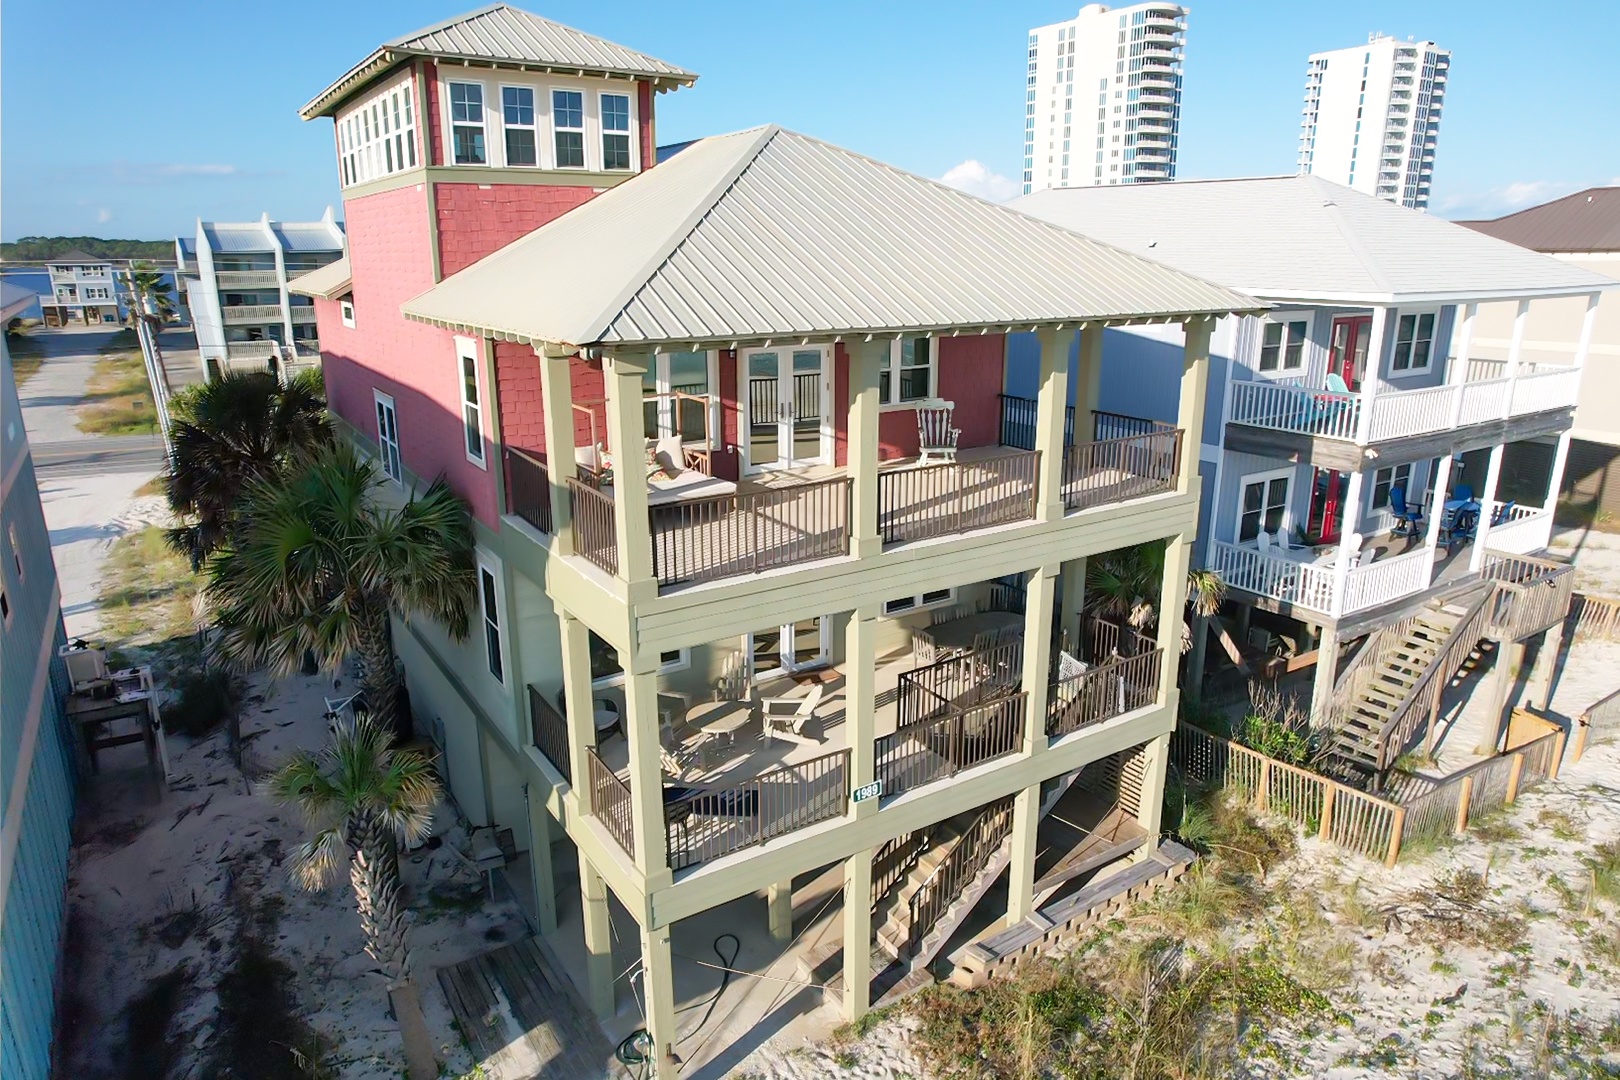 Beach Mouse is a multi-level, pet-friendly home